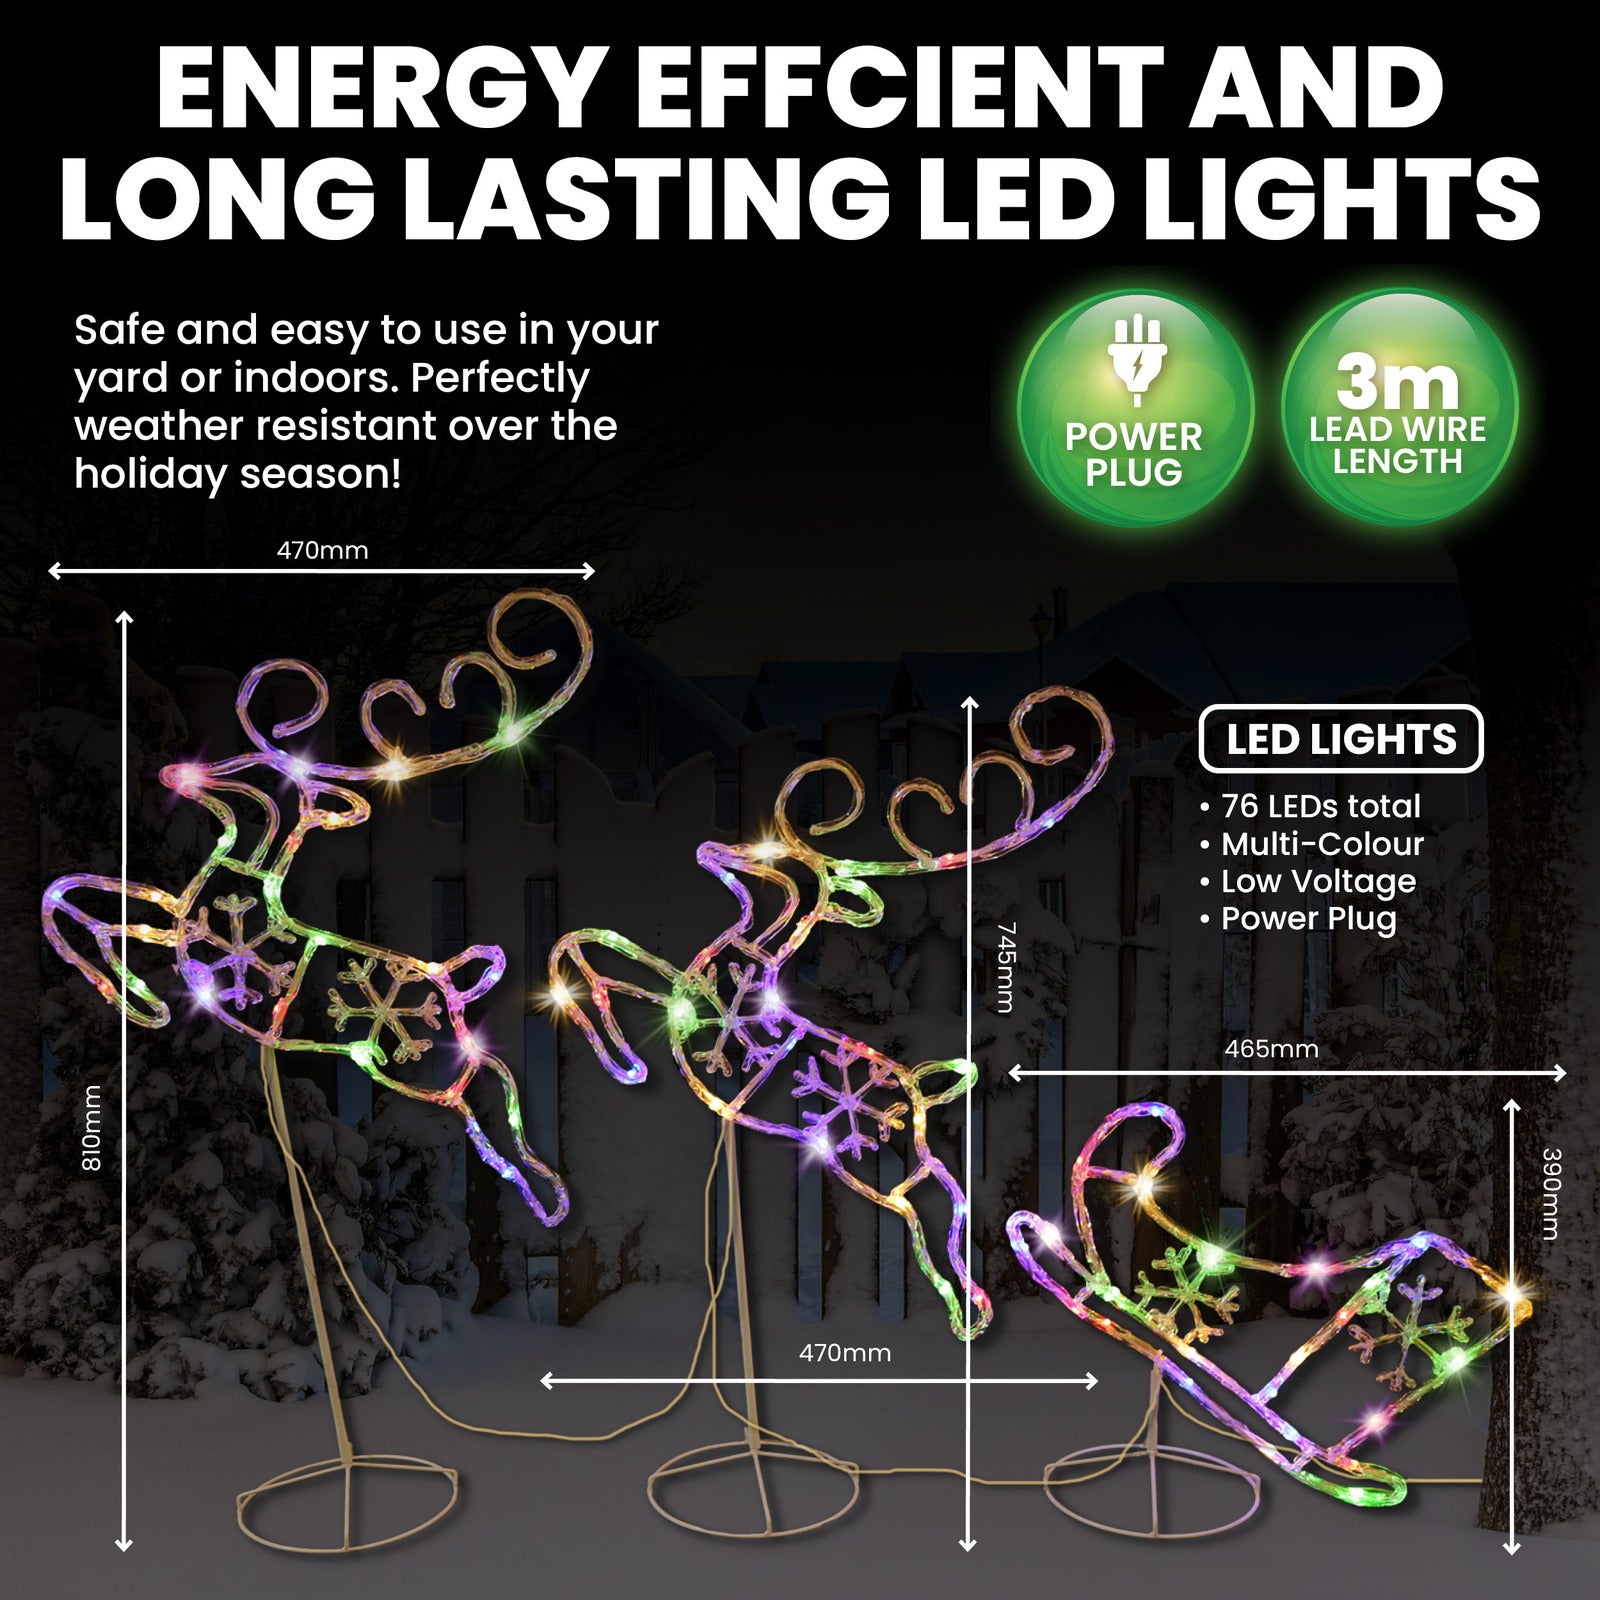 3m Reindeer & Sleigh Set Rope Light With Stands Multi-Colour